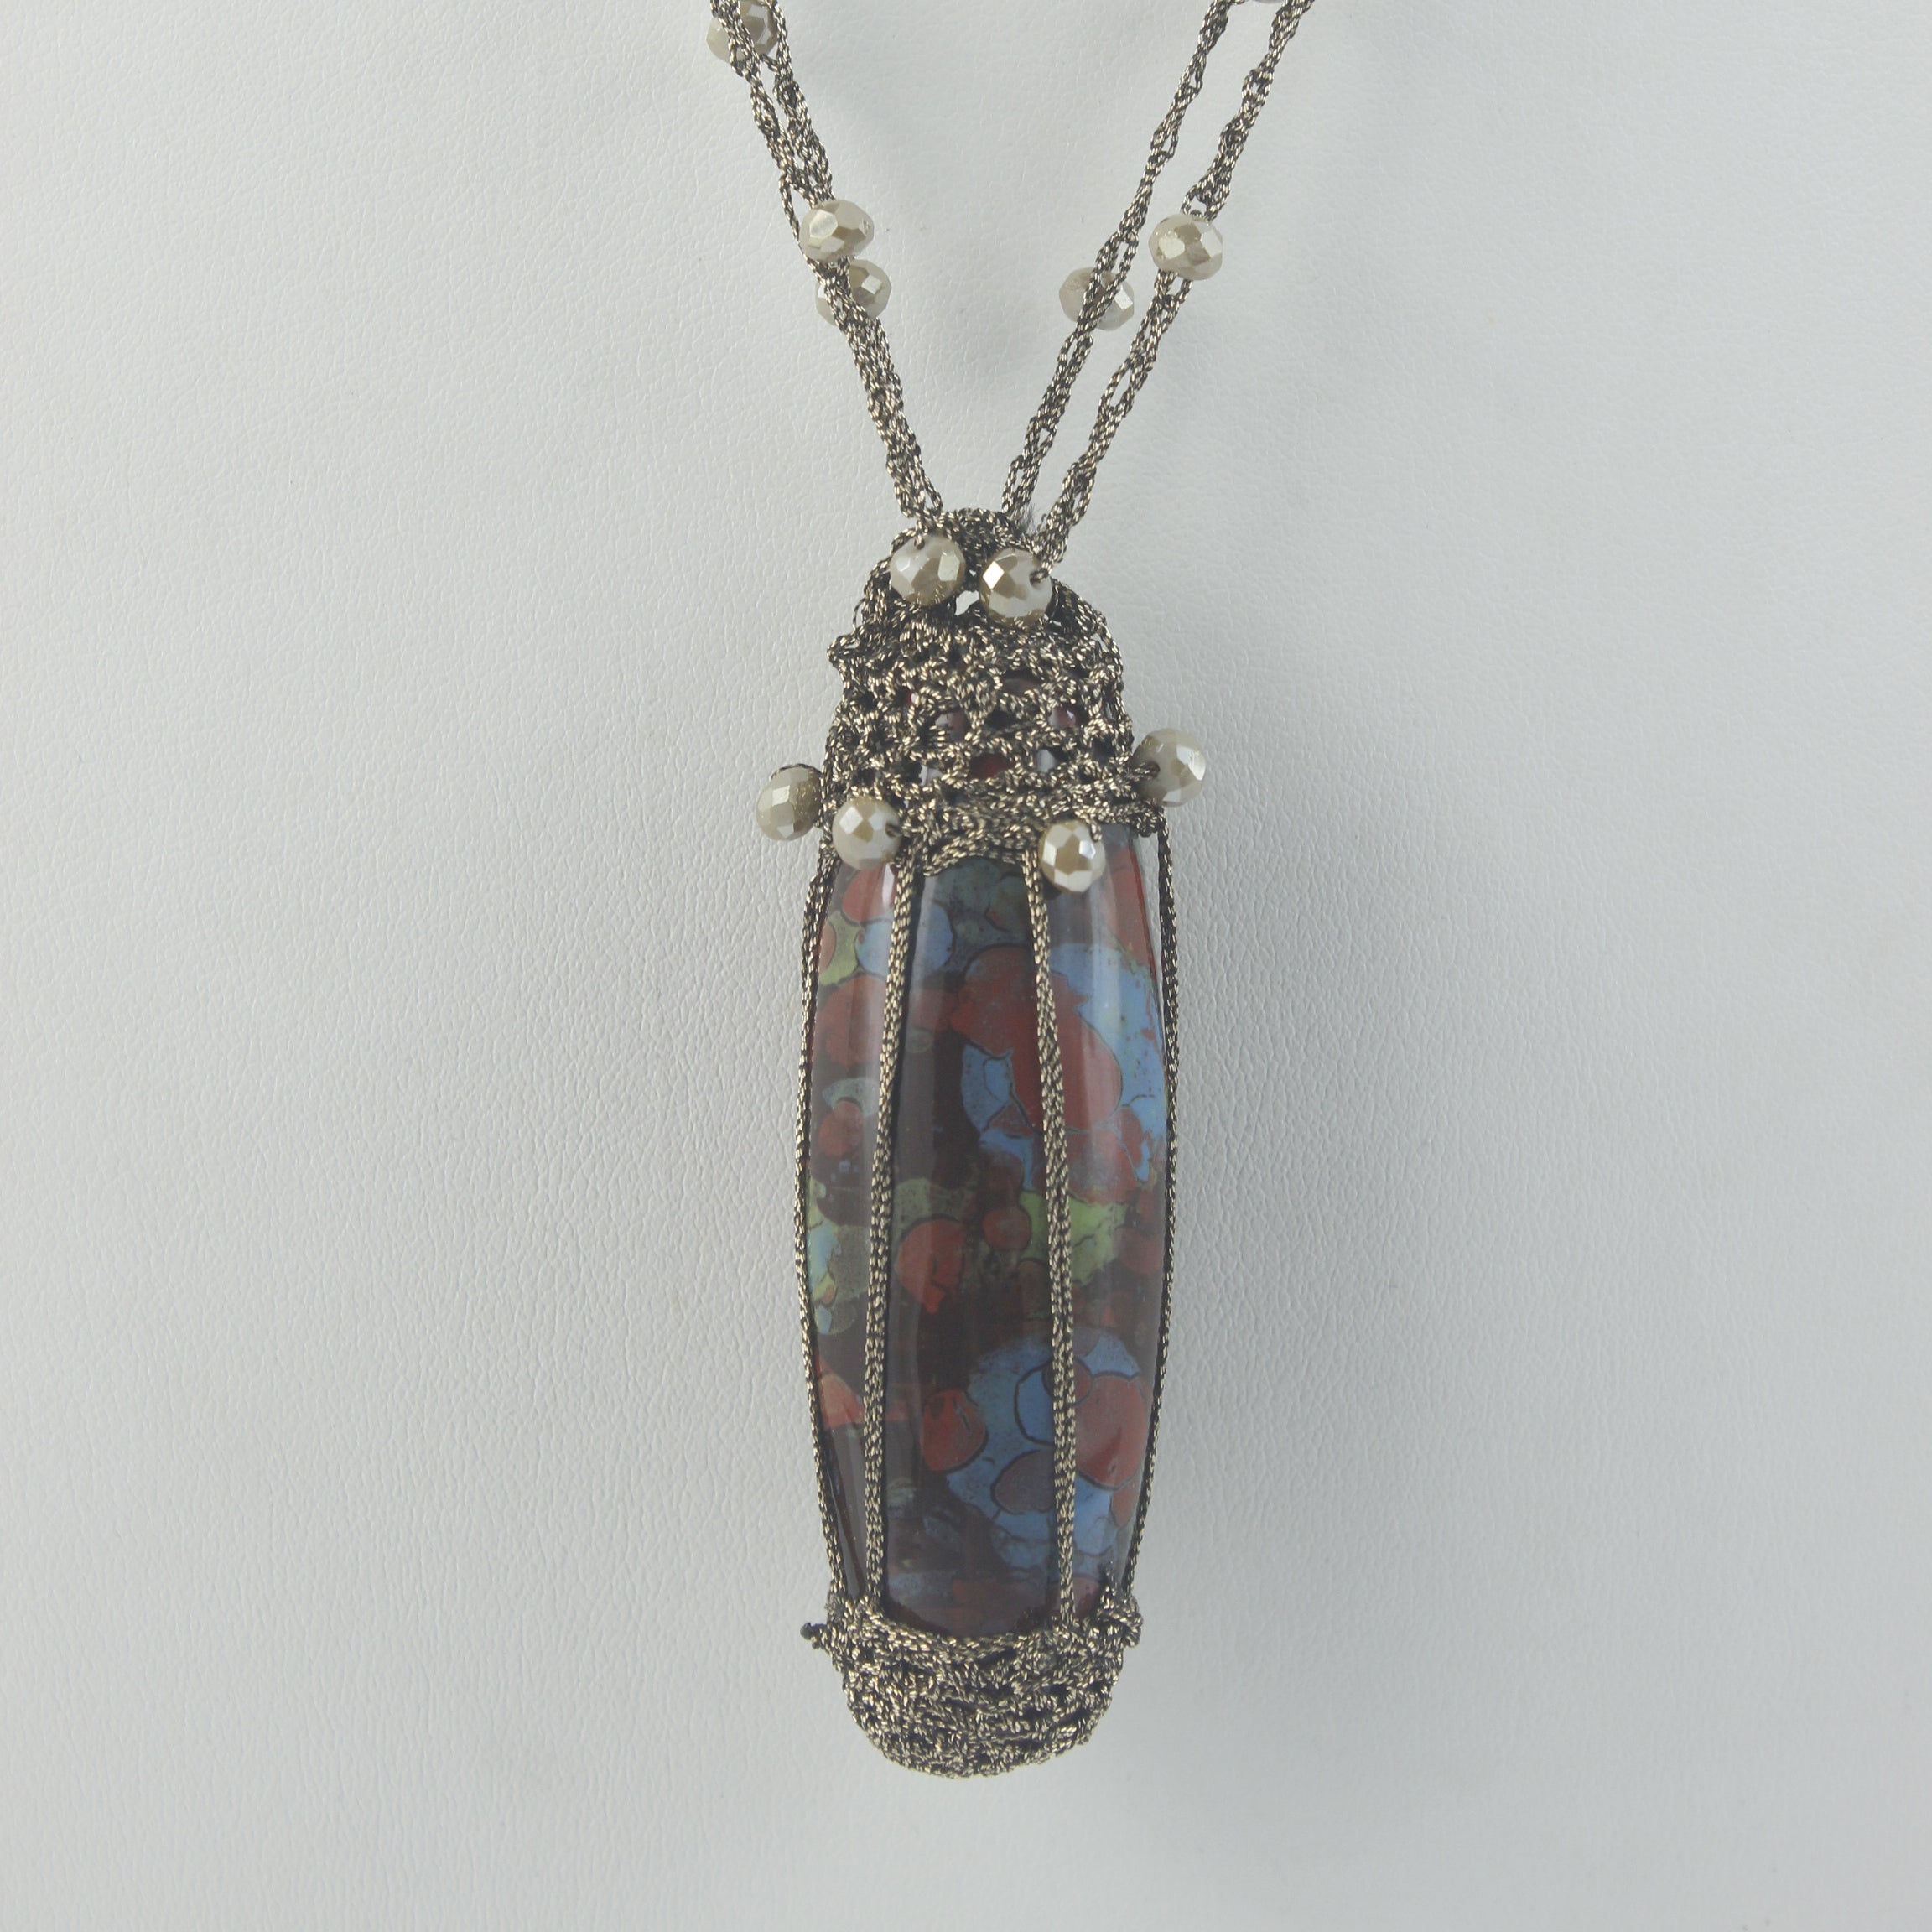 Special Glass Pendant Crystal Necklaces N2946